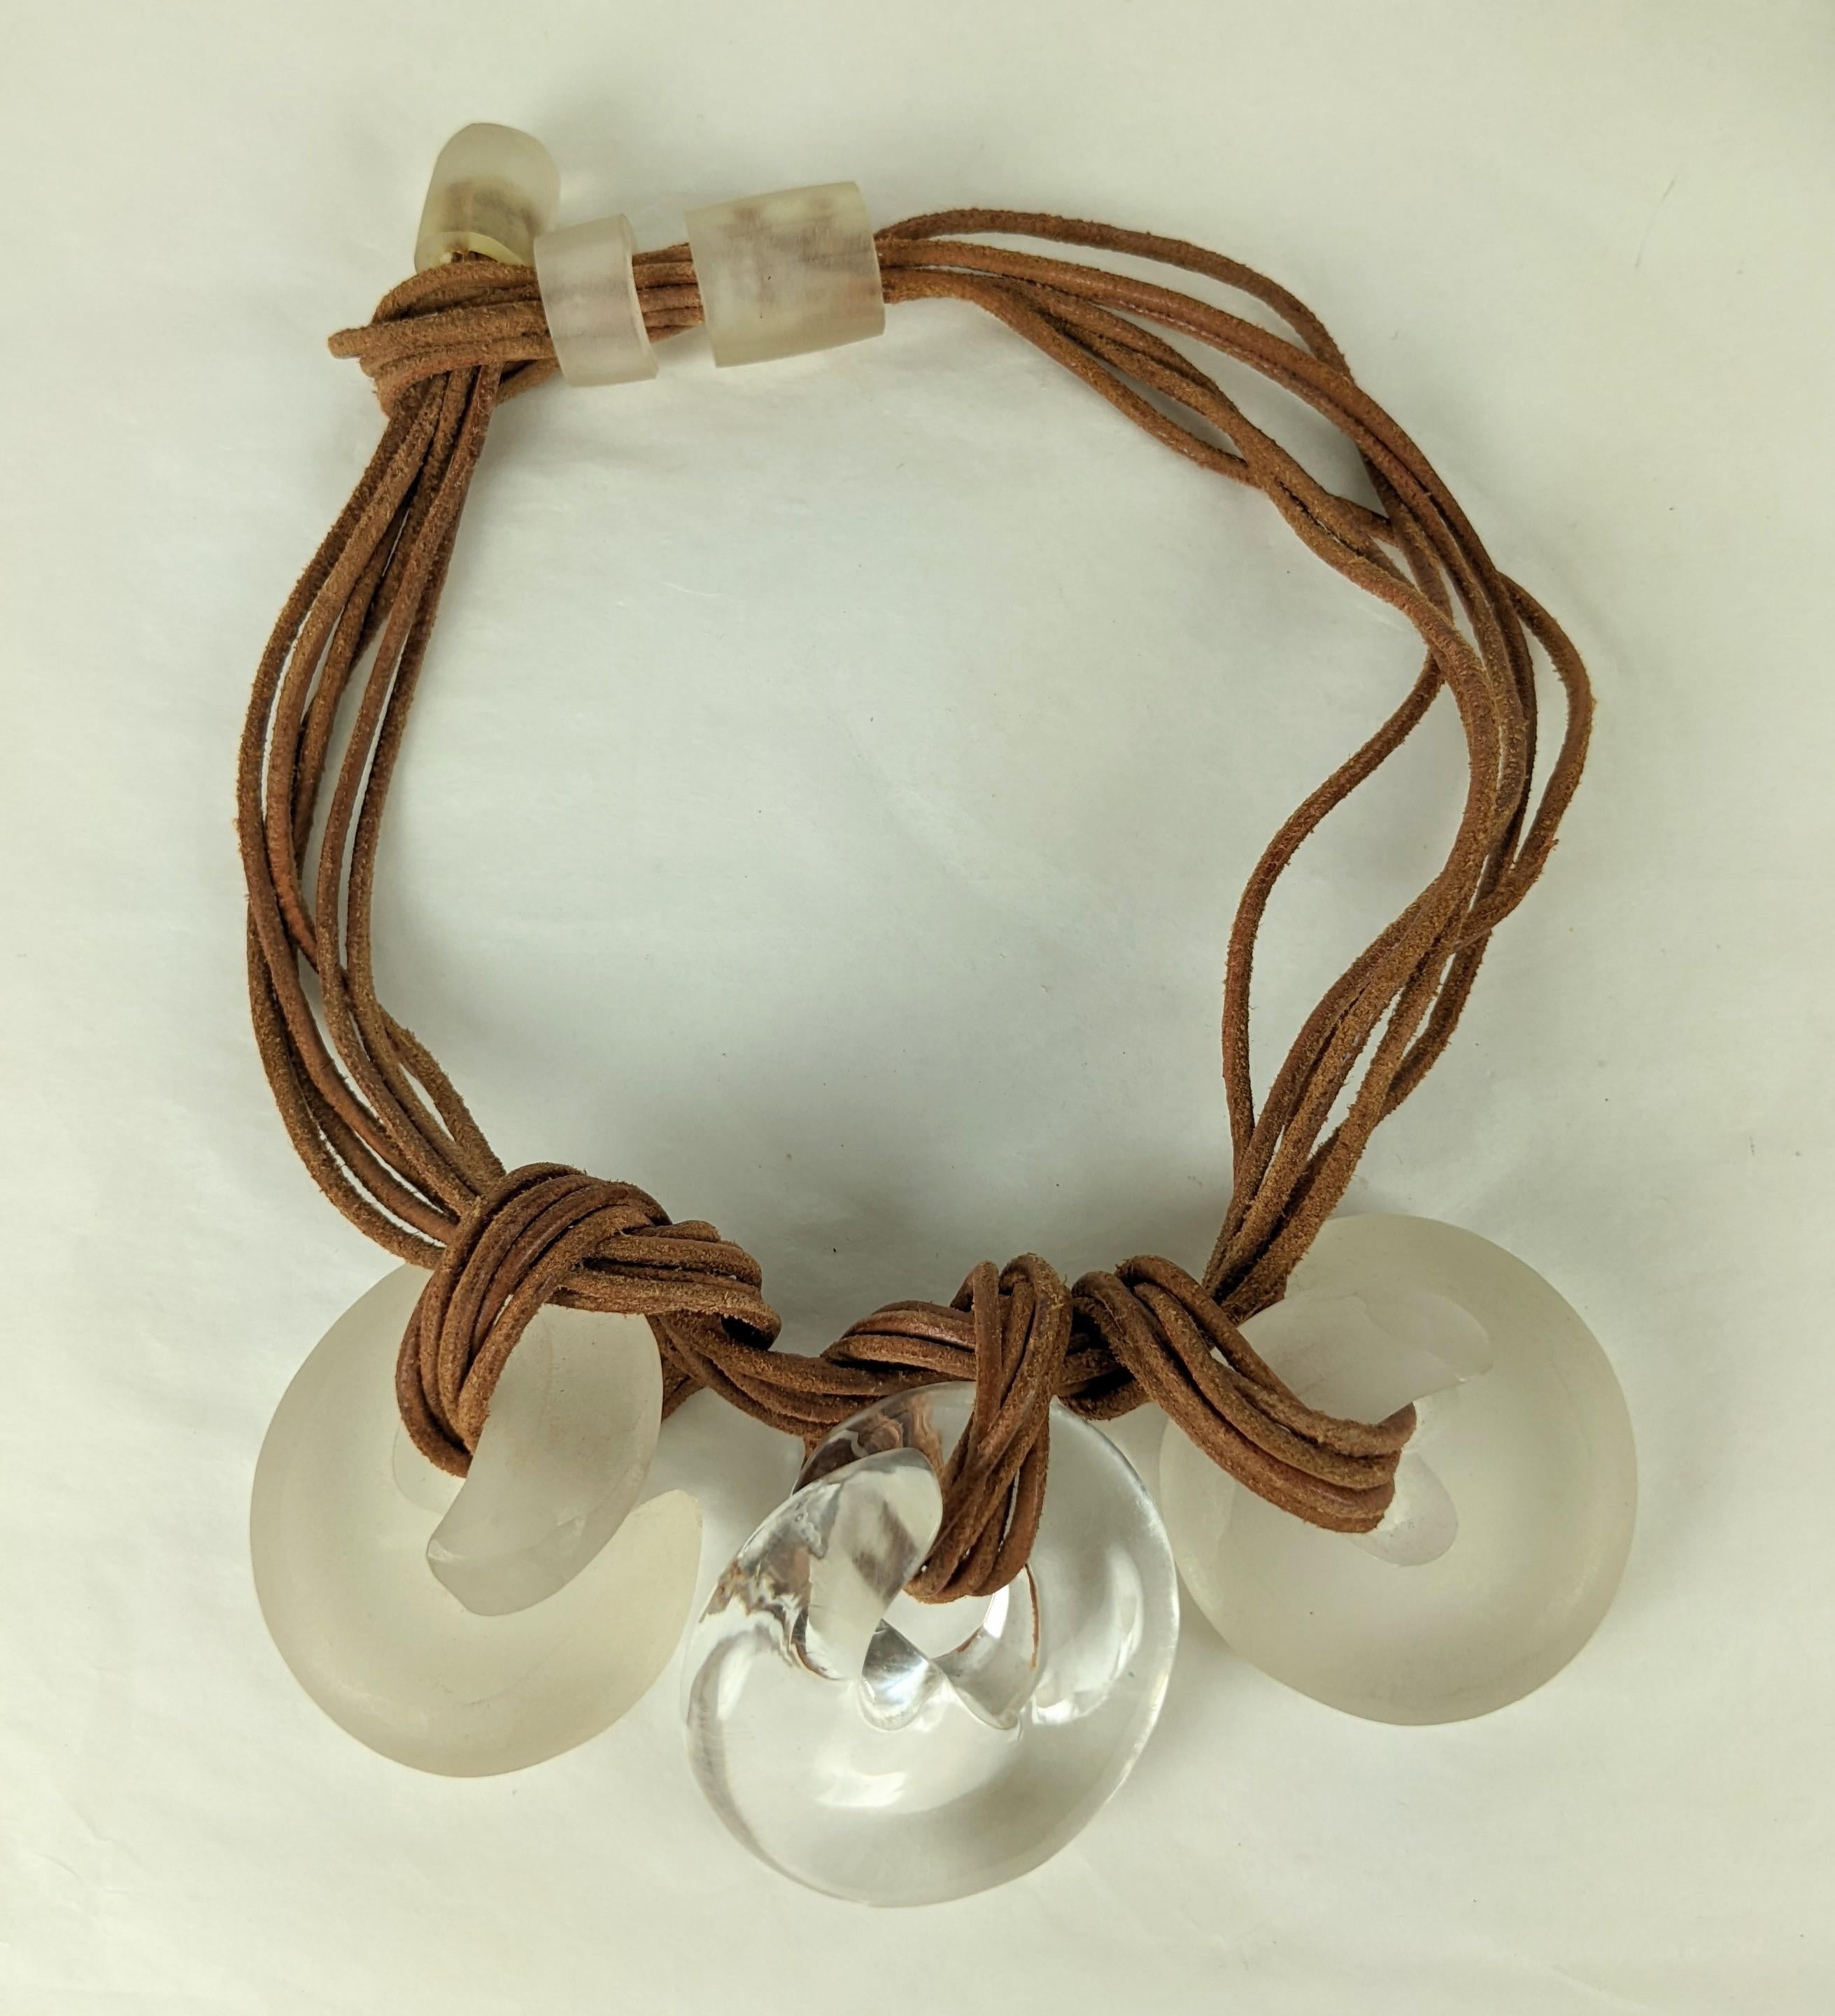 Striking Lucite Coil and Rawhide Pendant Necklace from the 1980's in the style of Cara Croninger. 3 hand carved lucite swirls are knotted onto rawhide with frosted lucite hilts and clasp. 2 of the swirls have matte frosted finish and the central one